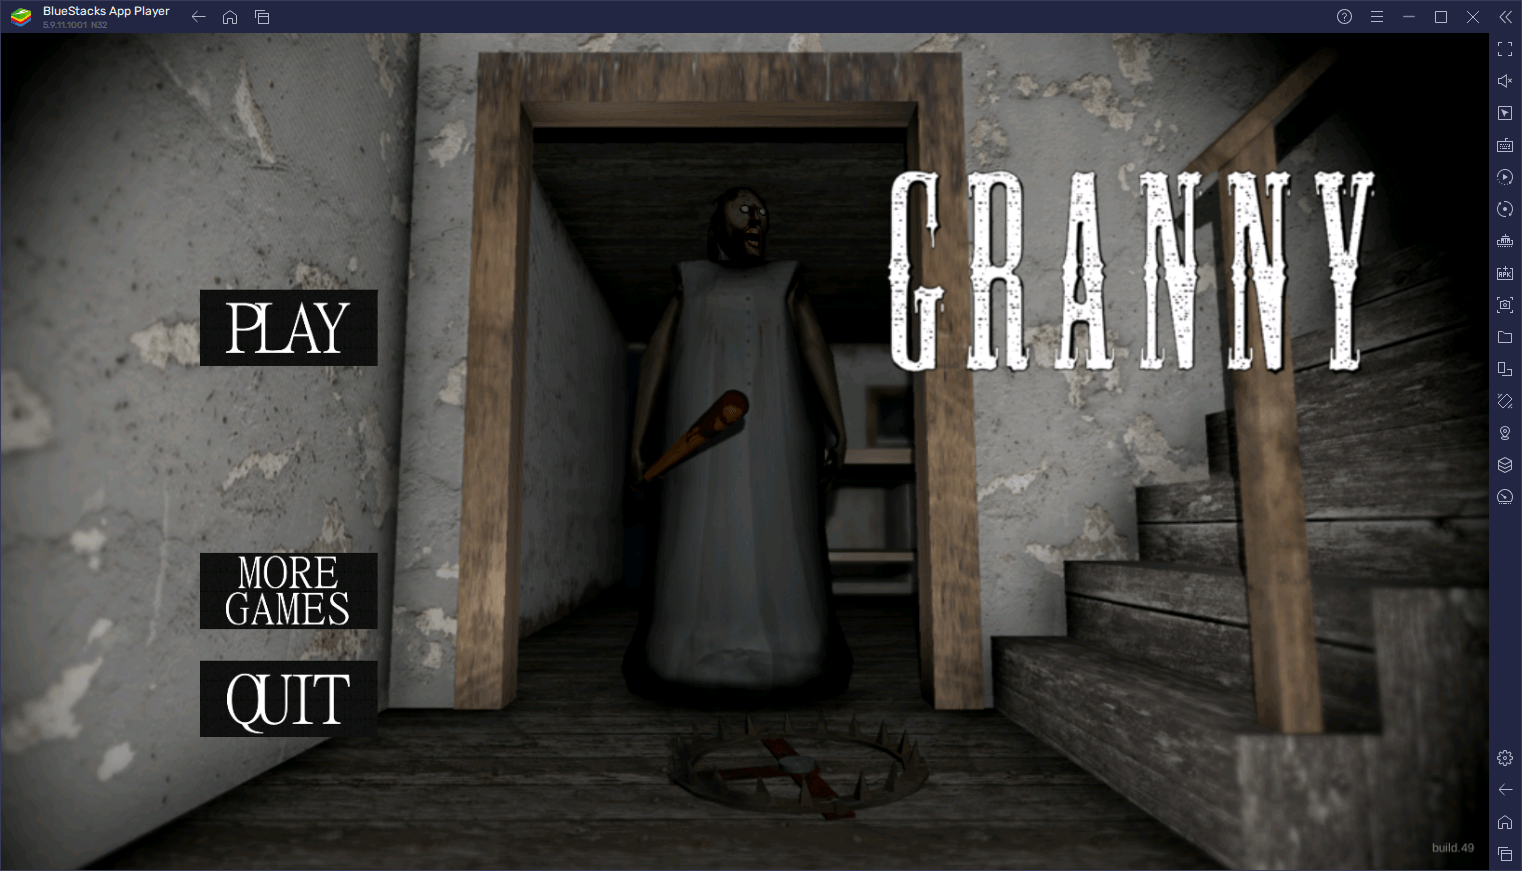 Top 5 Android Horror Games to Play on BlueStacks